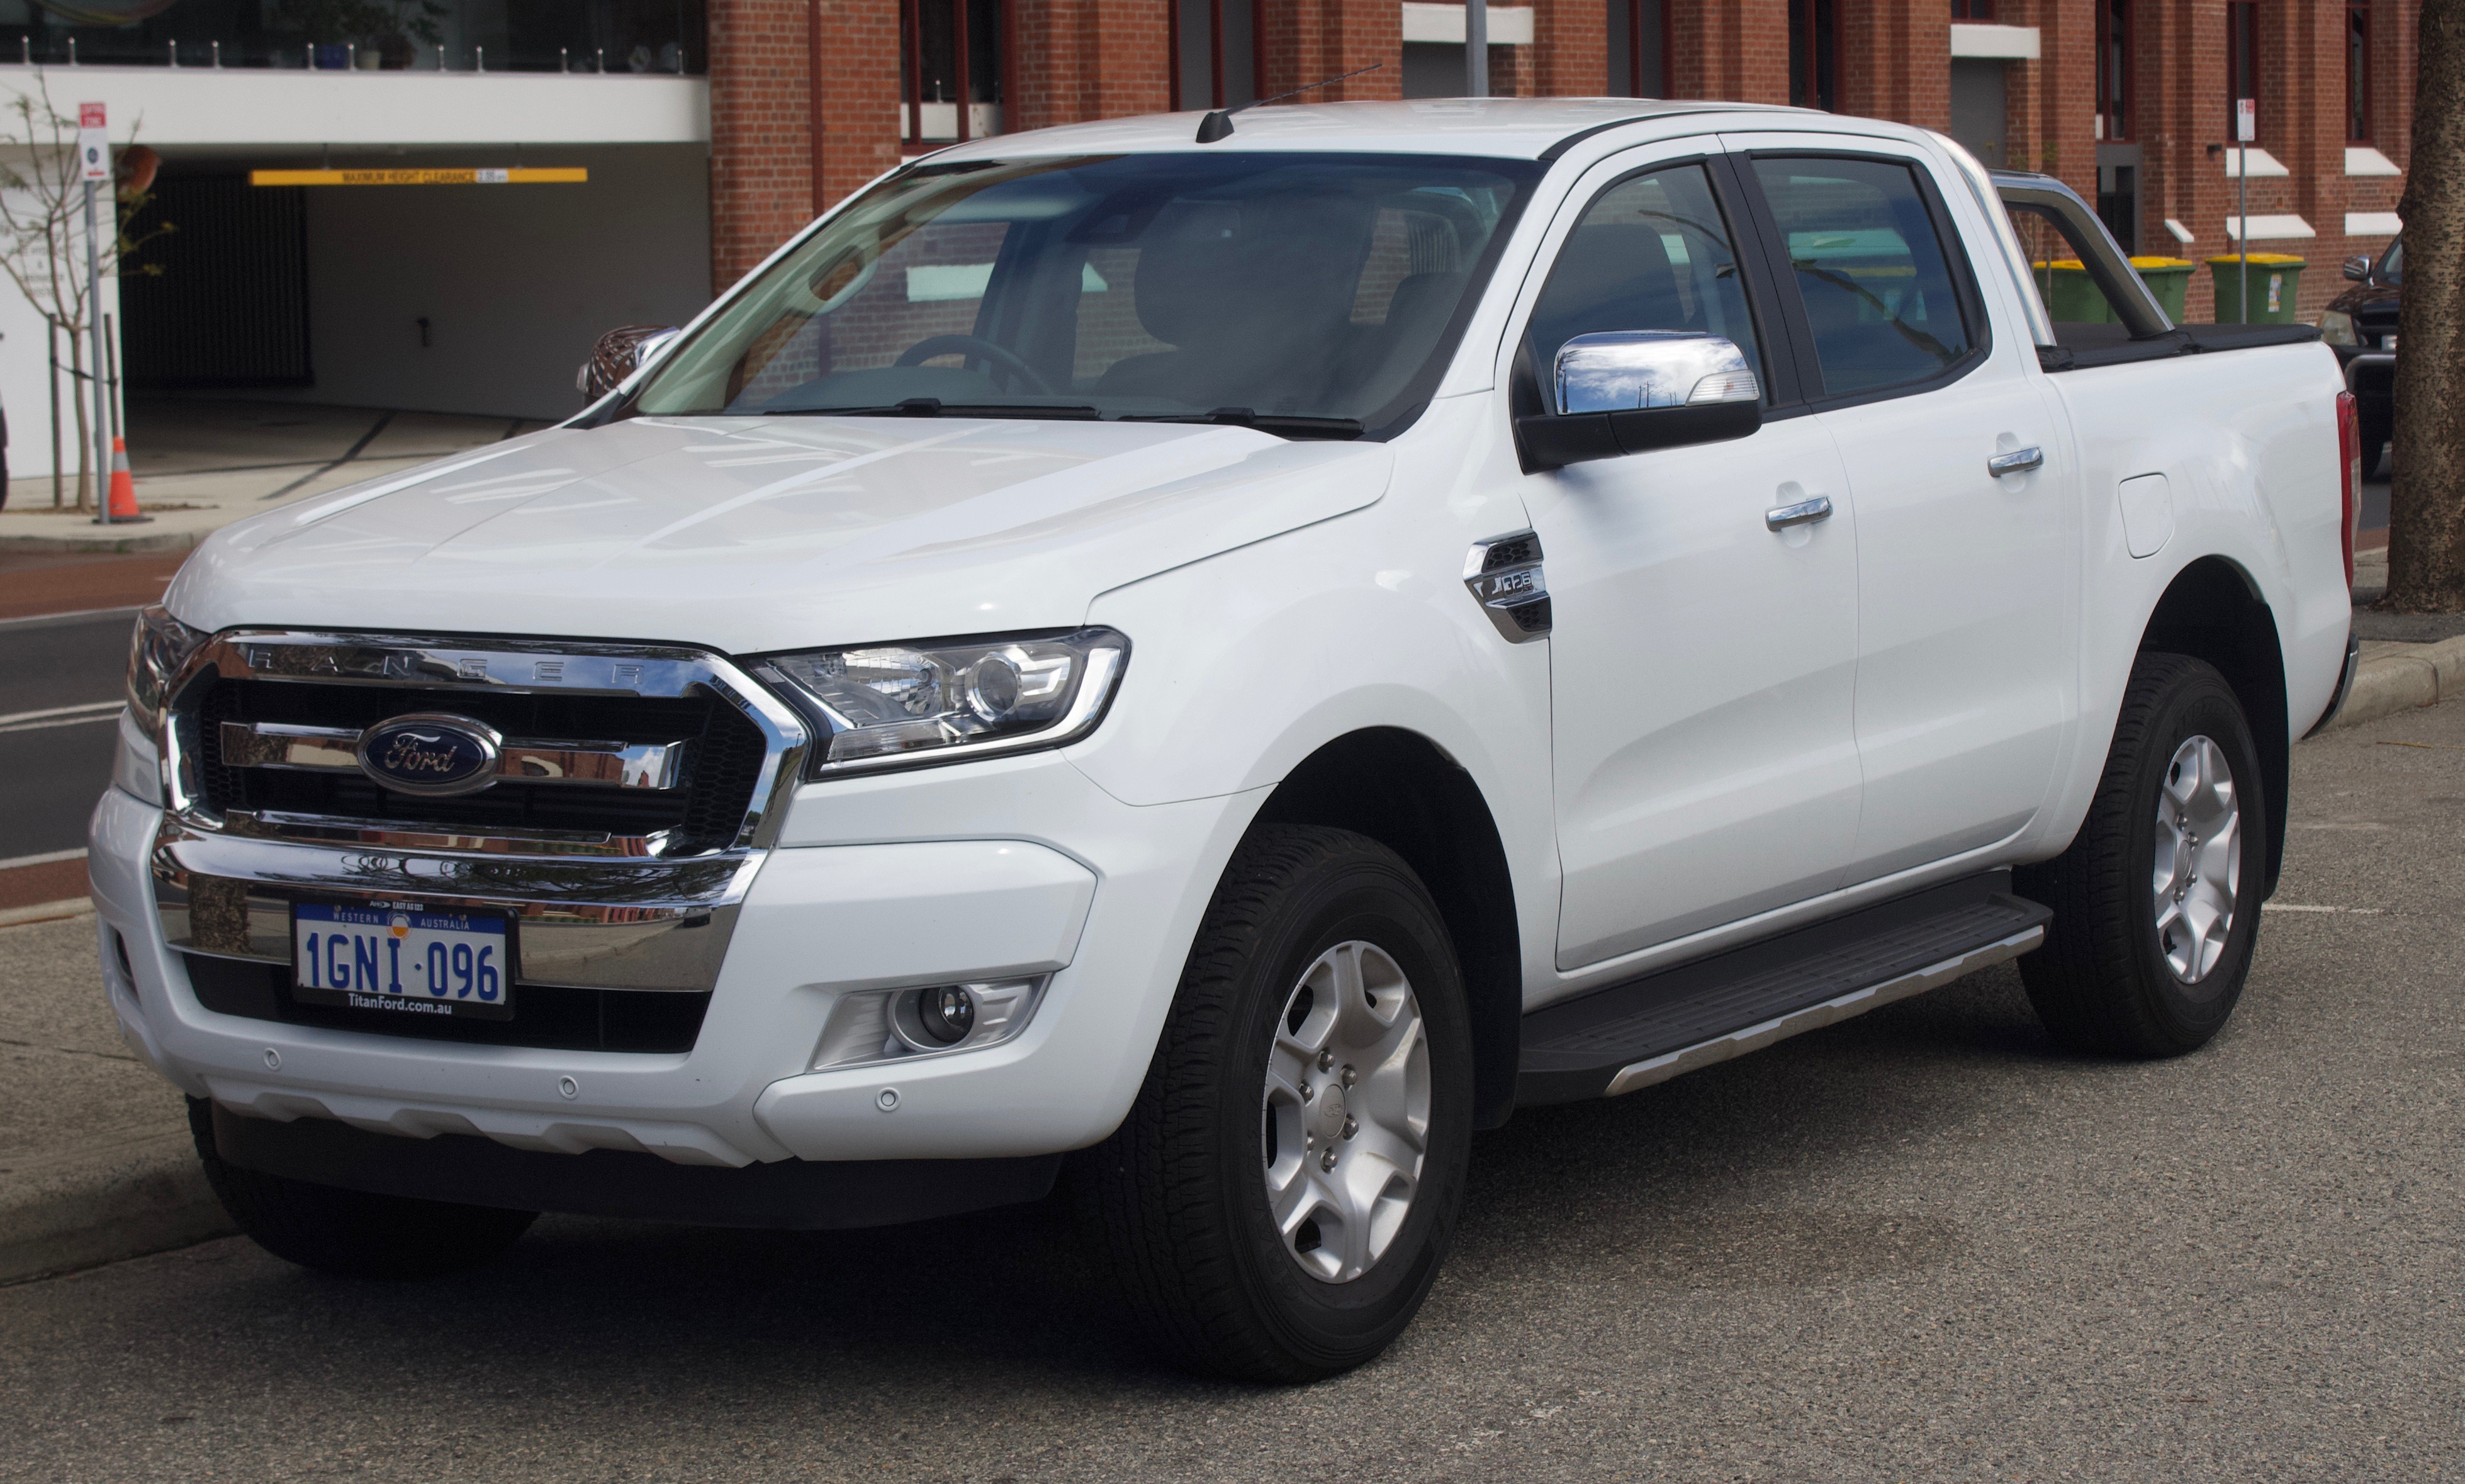 Ford Ranger Raptor hd specifications